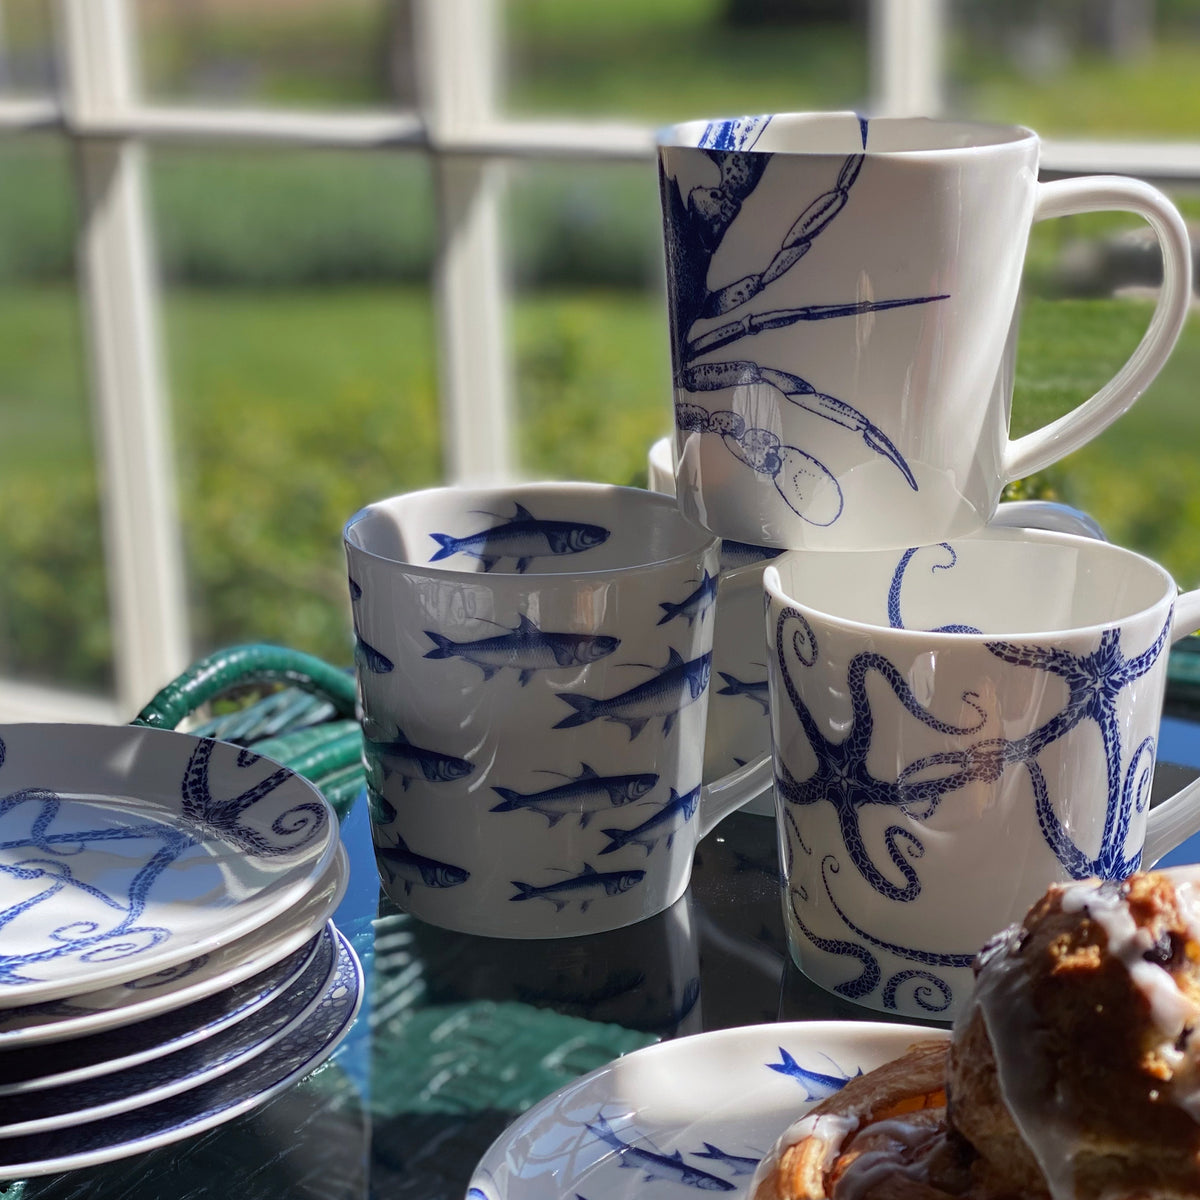 A set of white ceramic plates and Caskata Artisanal Home Starfish Mugs, featuring blue marine life designs, stacked on a glass table by a window. A pastry is partially visible in the foreground. The dinnerware is also dishwasher safe for easy cleaning.